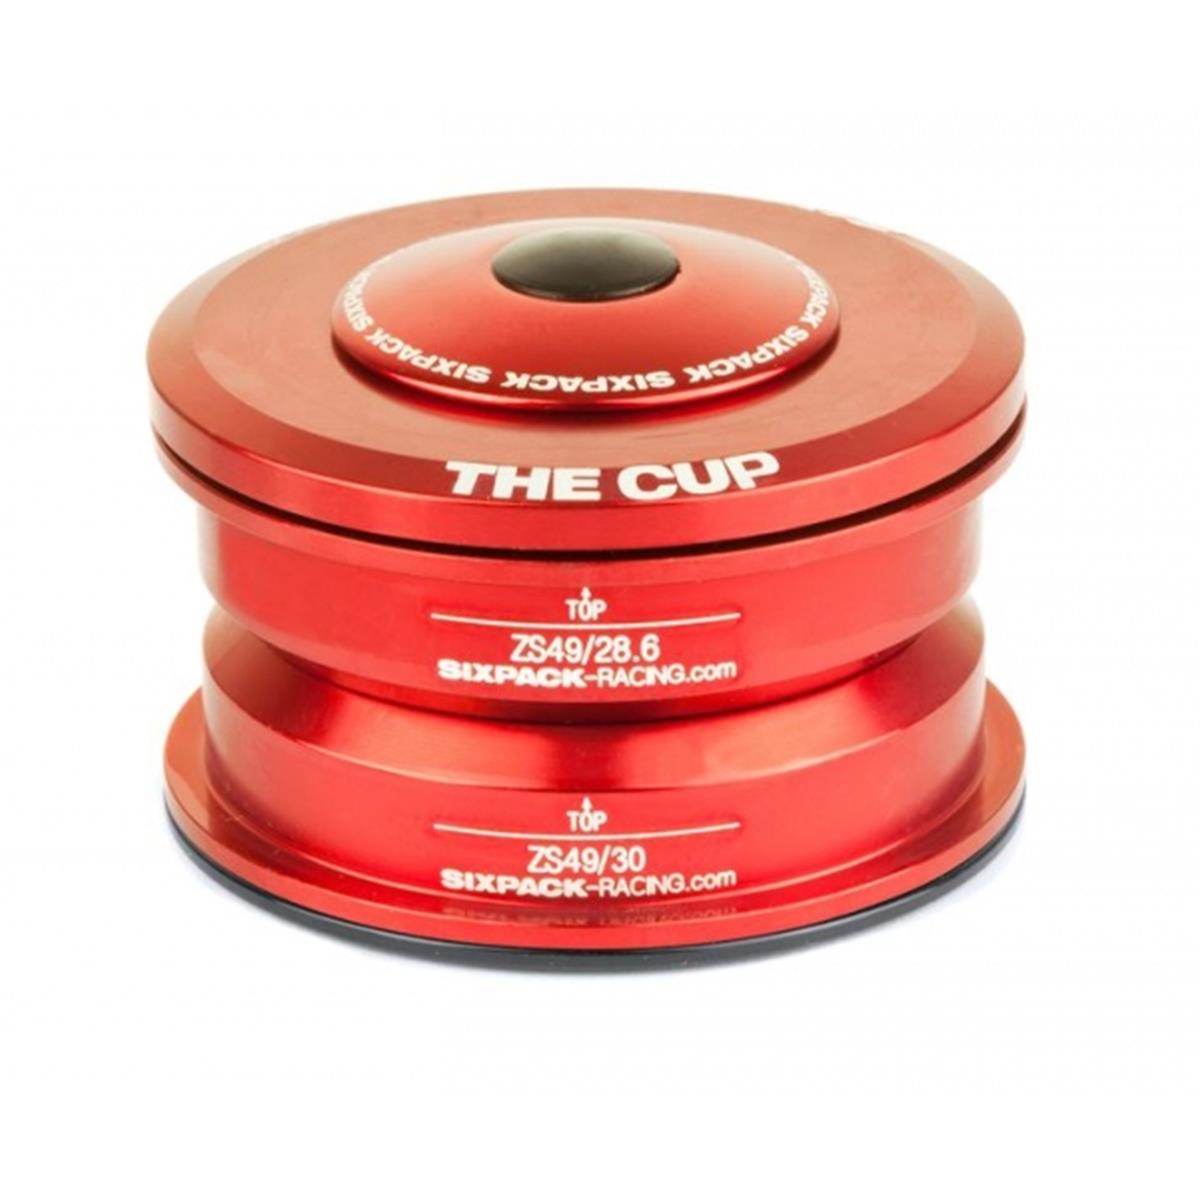 Sixpack Serie Sterzo The Cup Red, ZS49/28.6 I ZS49/30